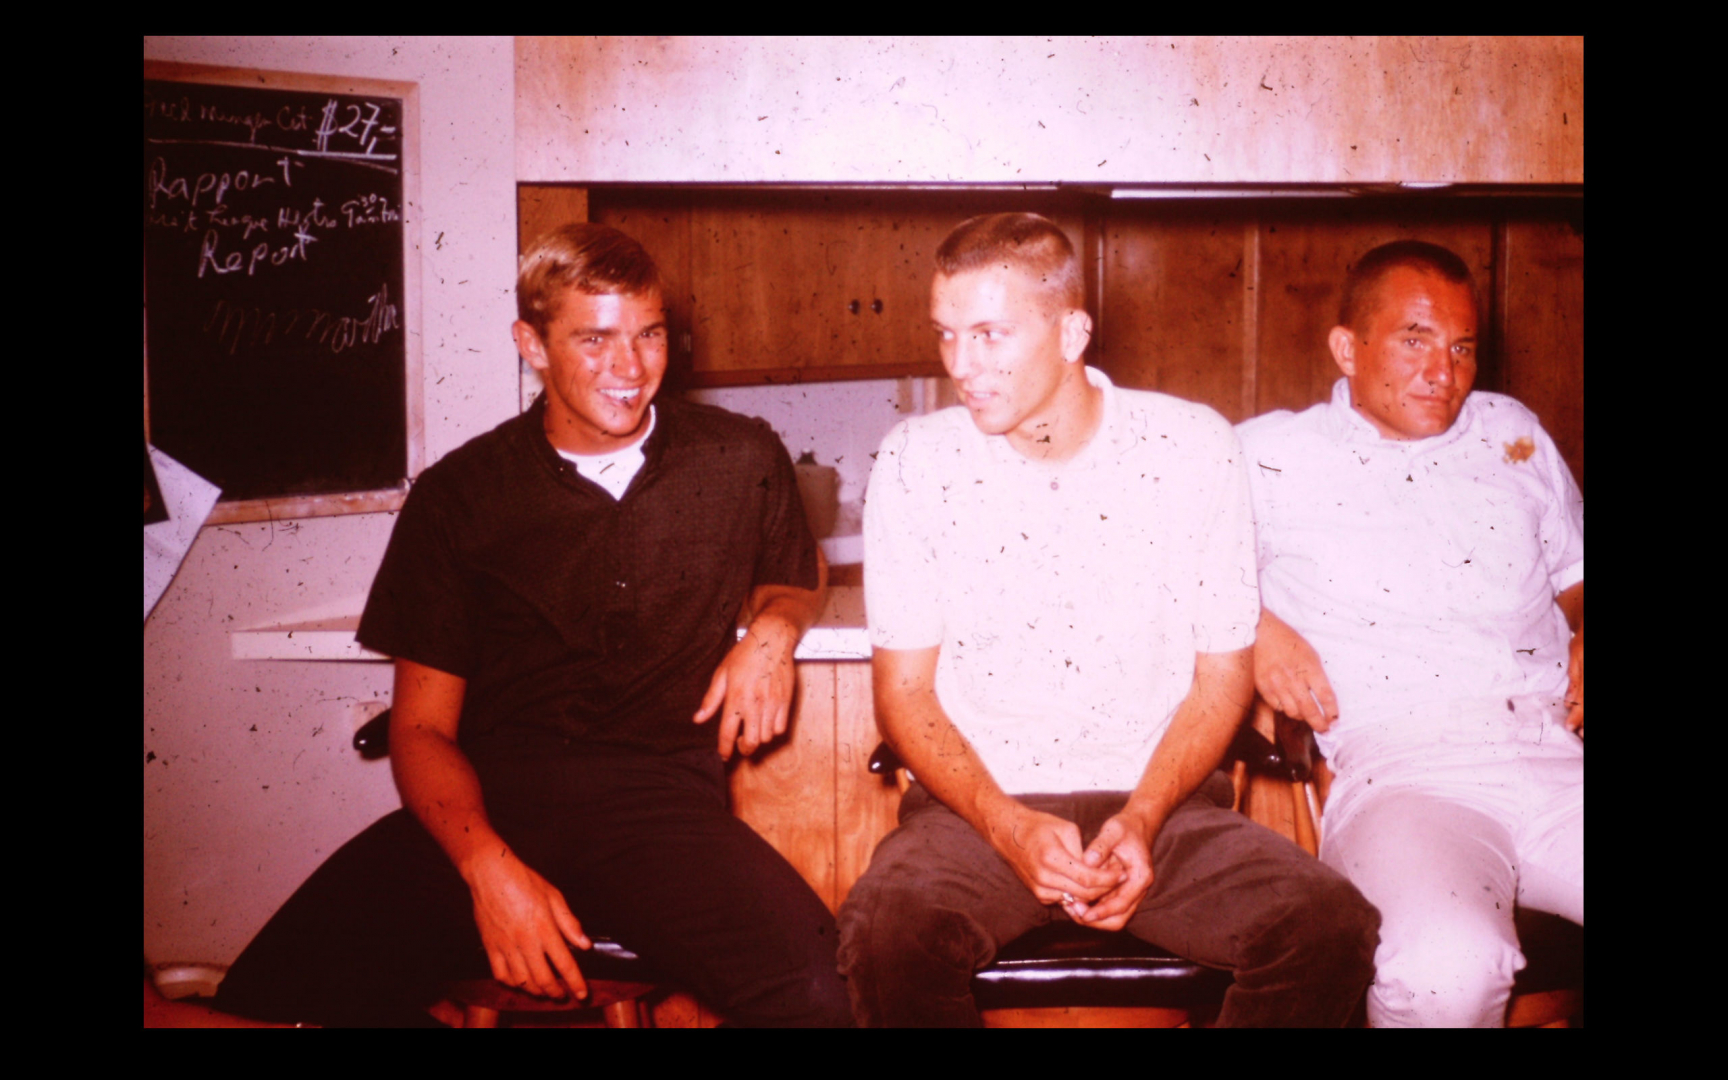 The classmates that I think can be identified are from L to R: Skip Heller, Dave Smock, and Mike Luttrell.